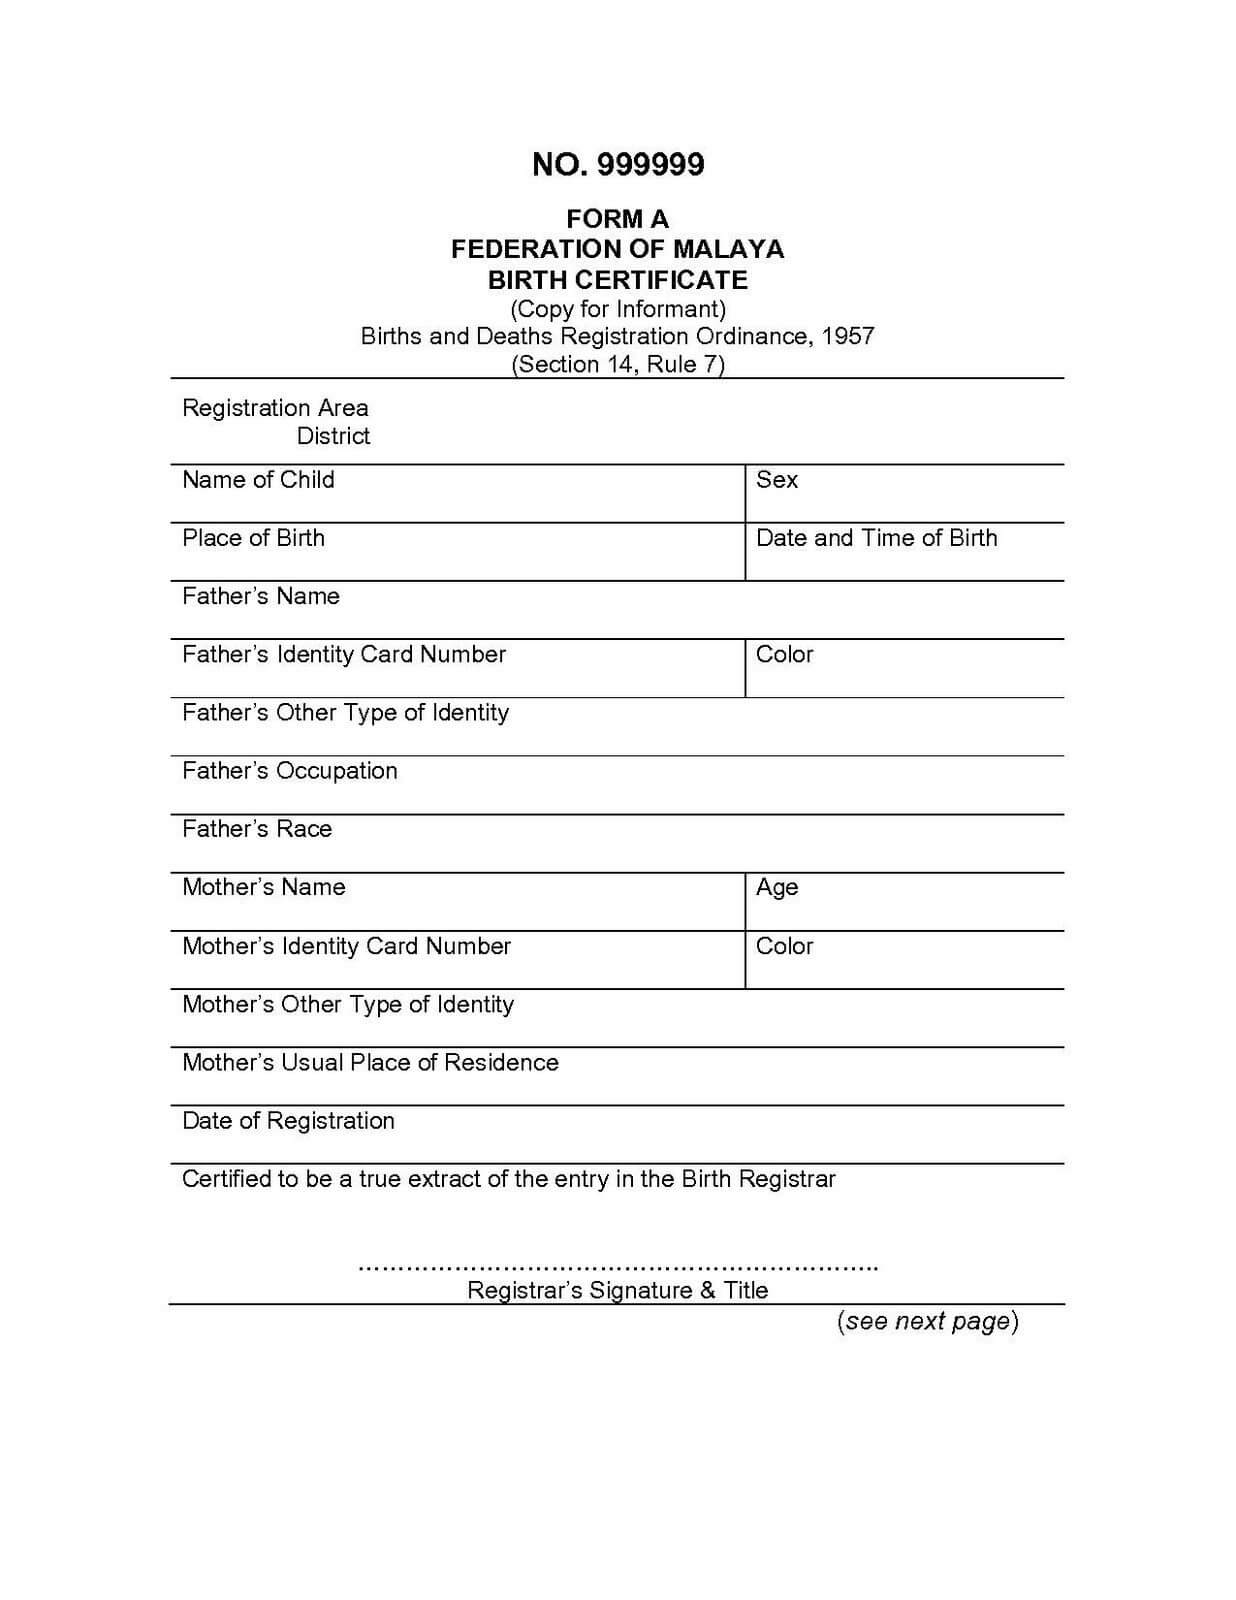 Translate Marriage Certificate From Spanish To English Intended For Birth Certificate Translation Template